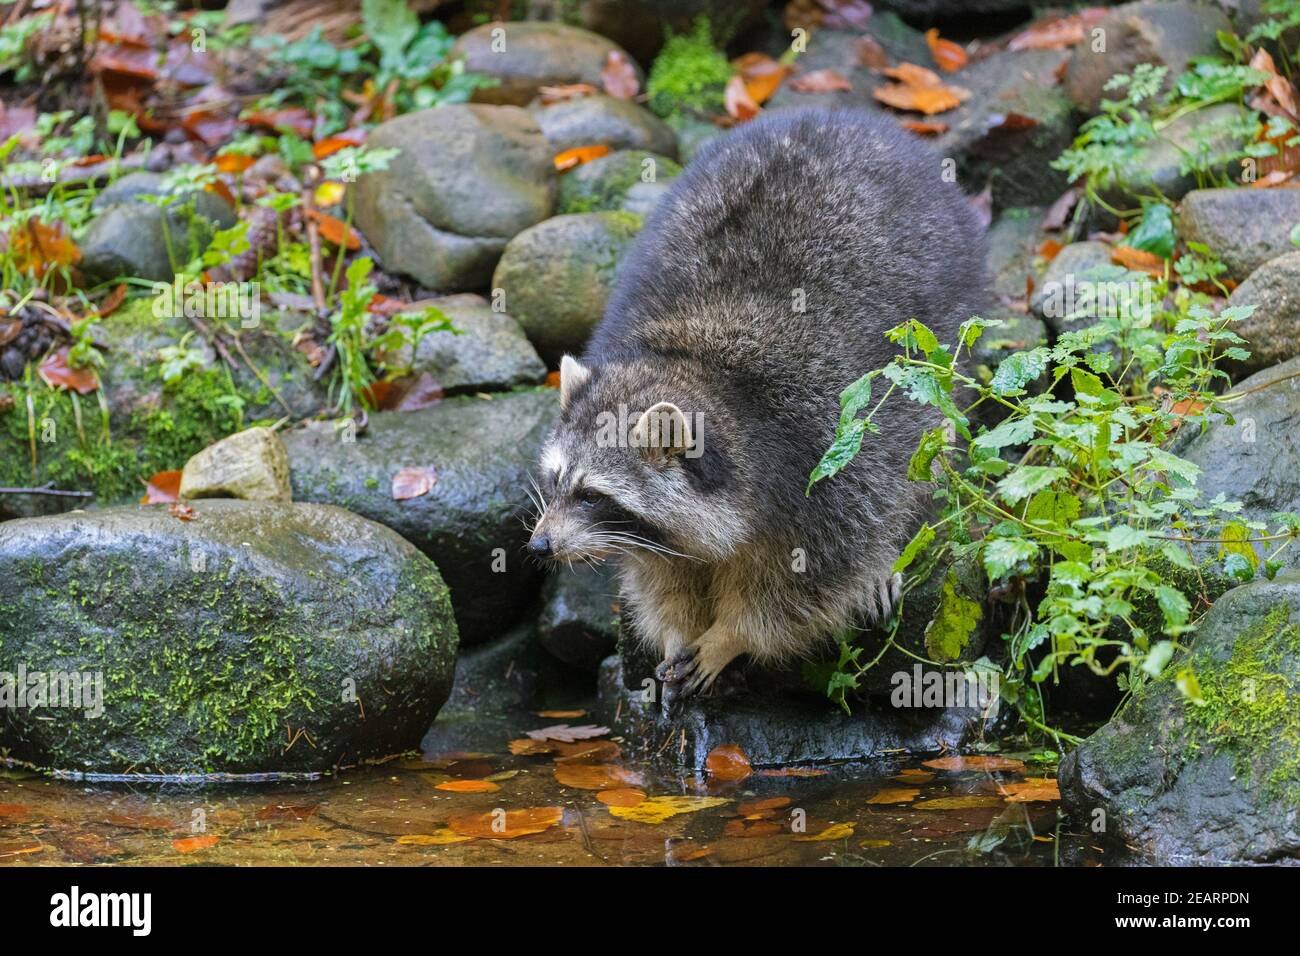 Raccoon (Procyon lotor), invasive species native to North America, washing food in water from brook / stream Stock Photo